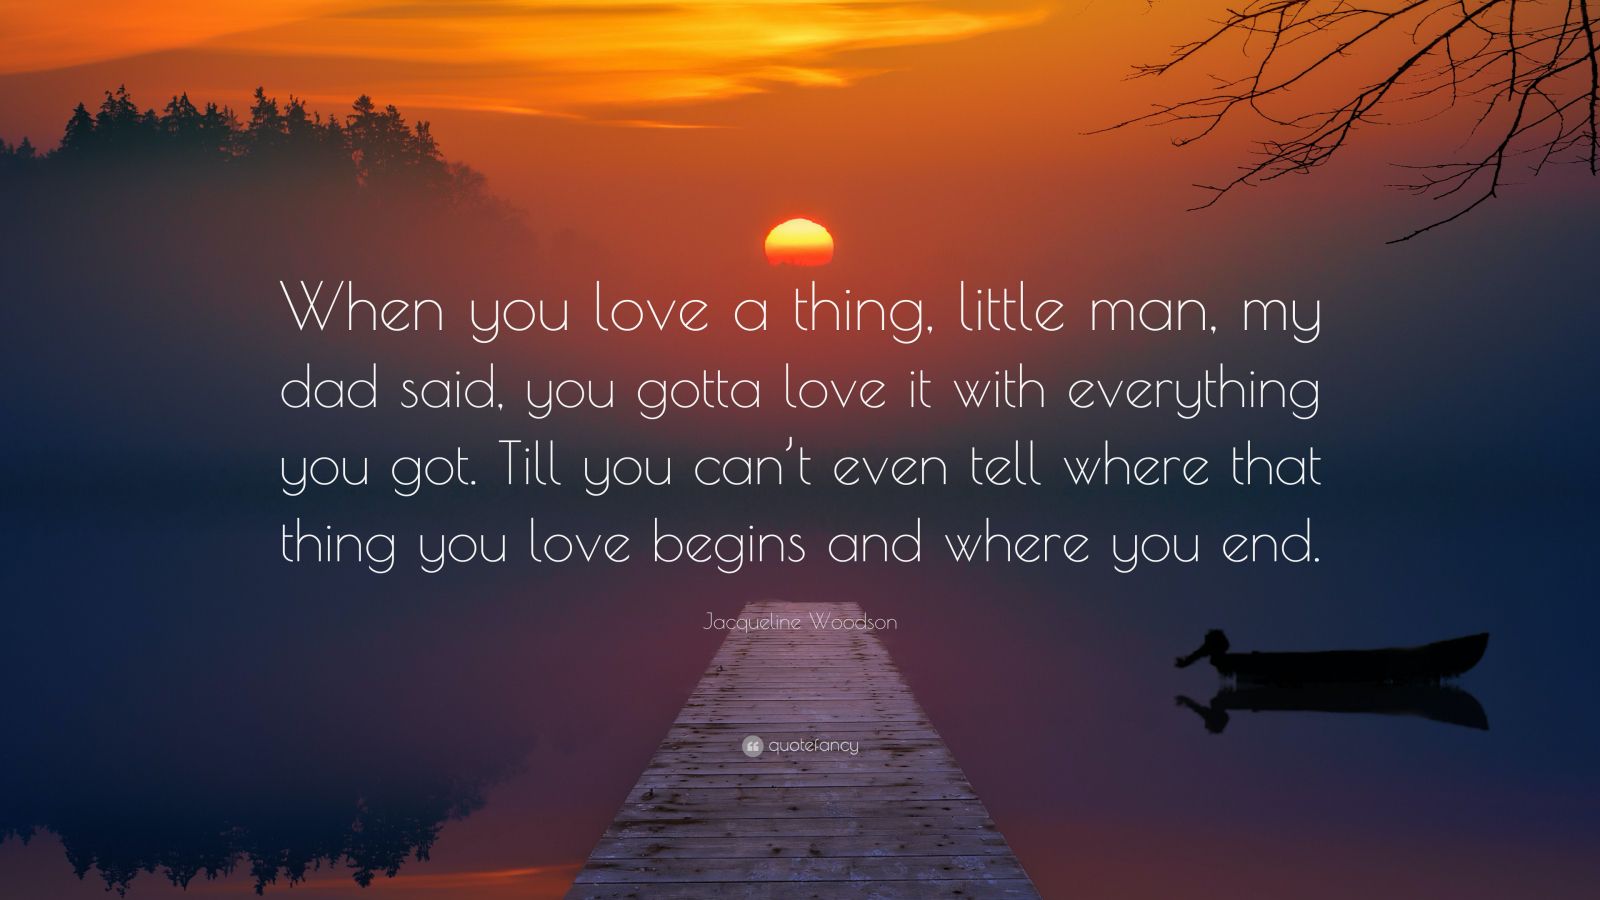 Jacqueline Woodson Quote: “When you love a thing, little man, my dad ...